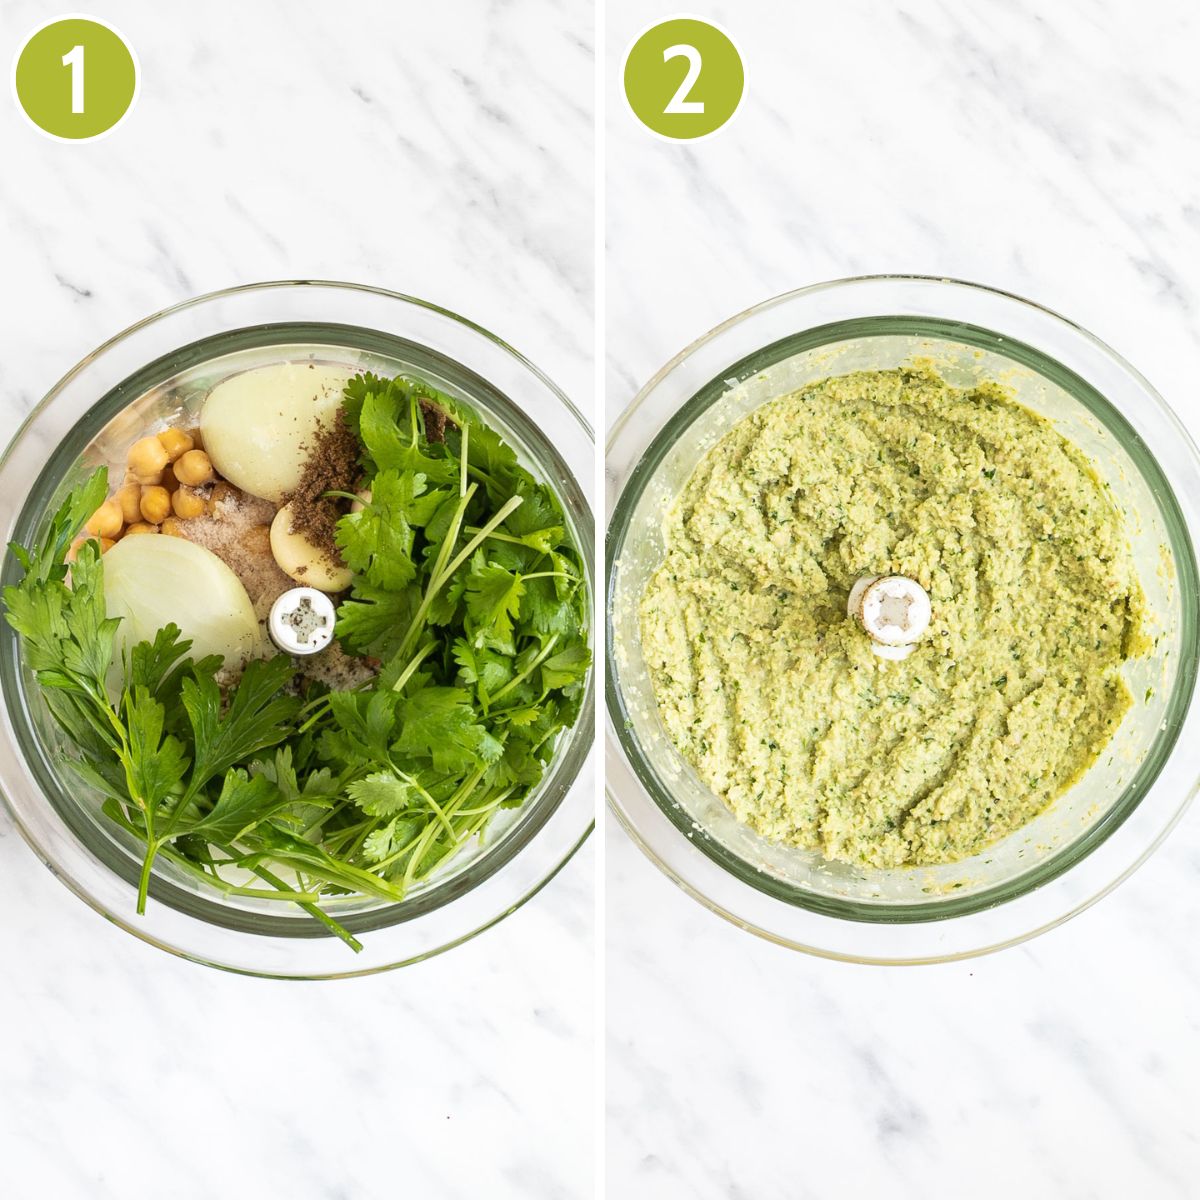 2 photo collage showing a glass food processor container from above first with raw ingredients like green herbs, chickpeas and onion and the second one is the light green crumbly mixture